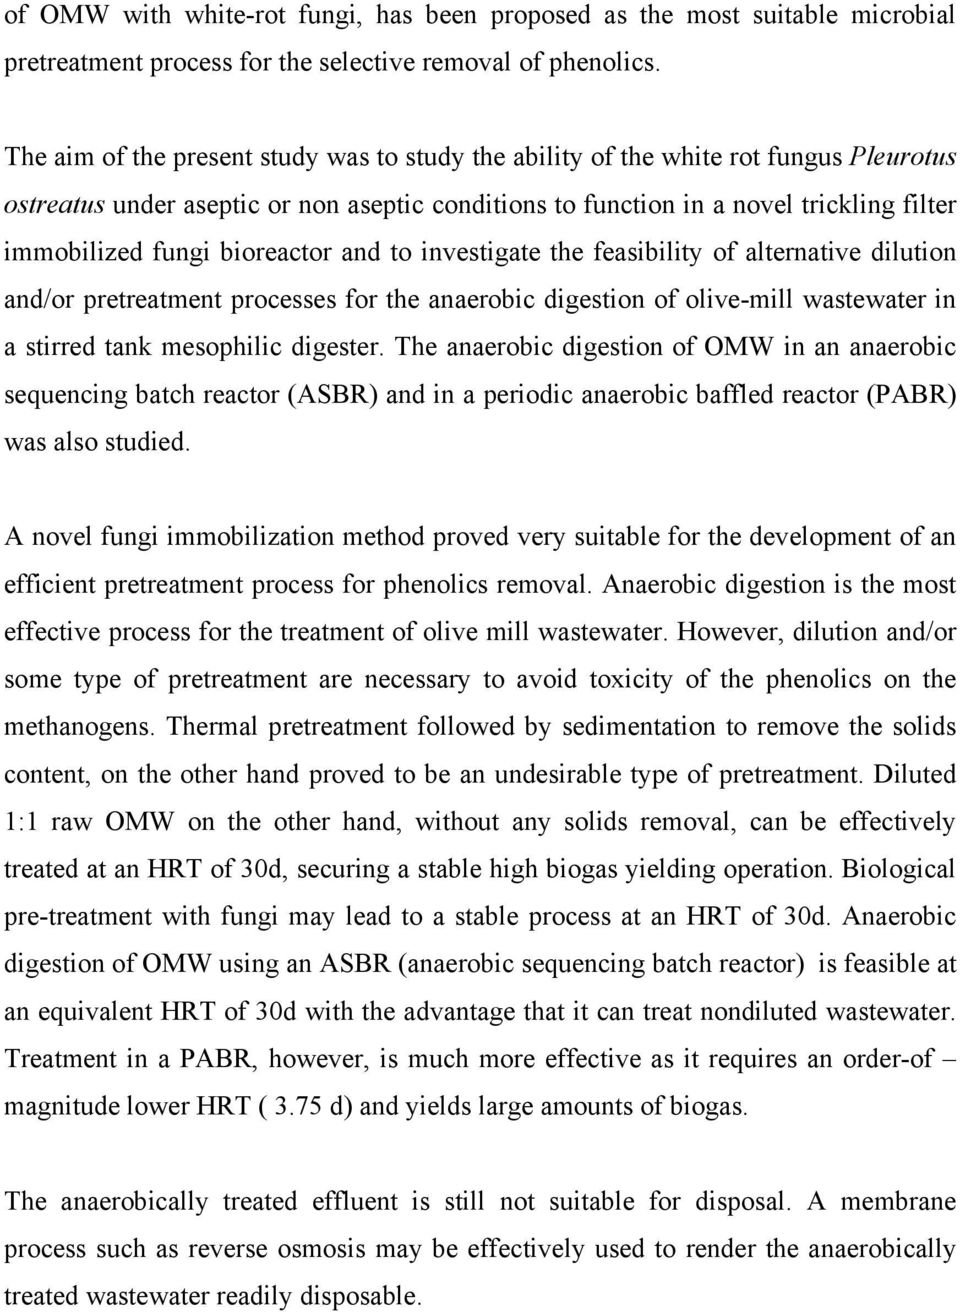 bioreactor and to investigate the feasibility of alternative dilution and/or pretreatment processes for the anaerobic digestion of olive-mill wastewater in a stirred tank mesophilic digester.